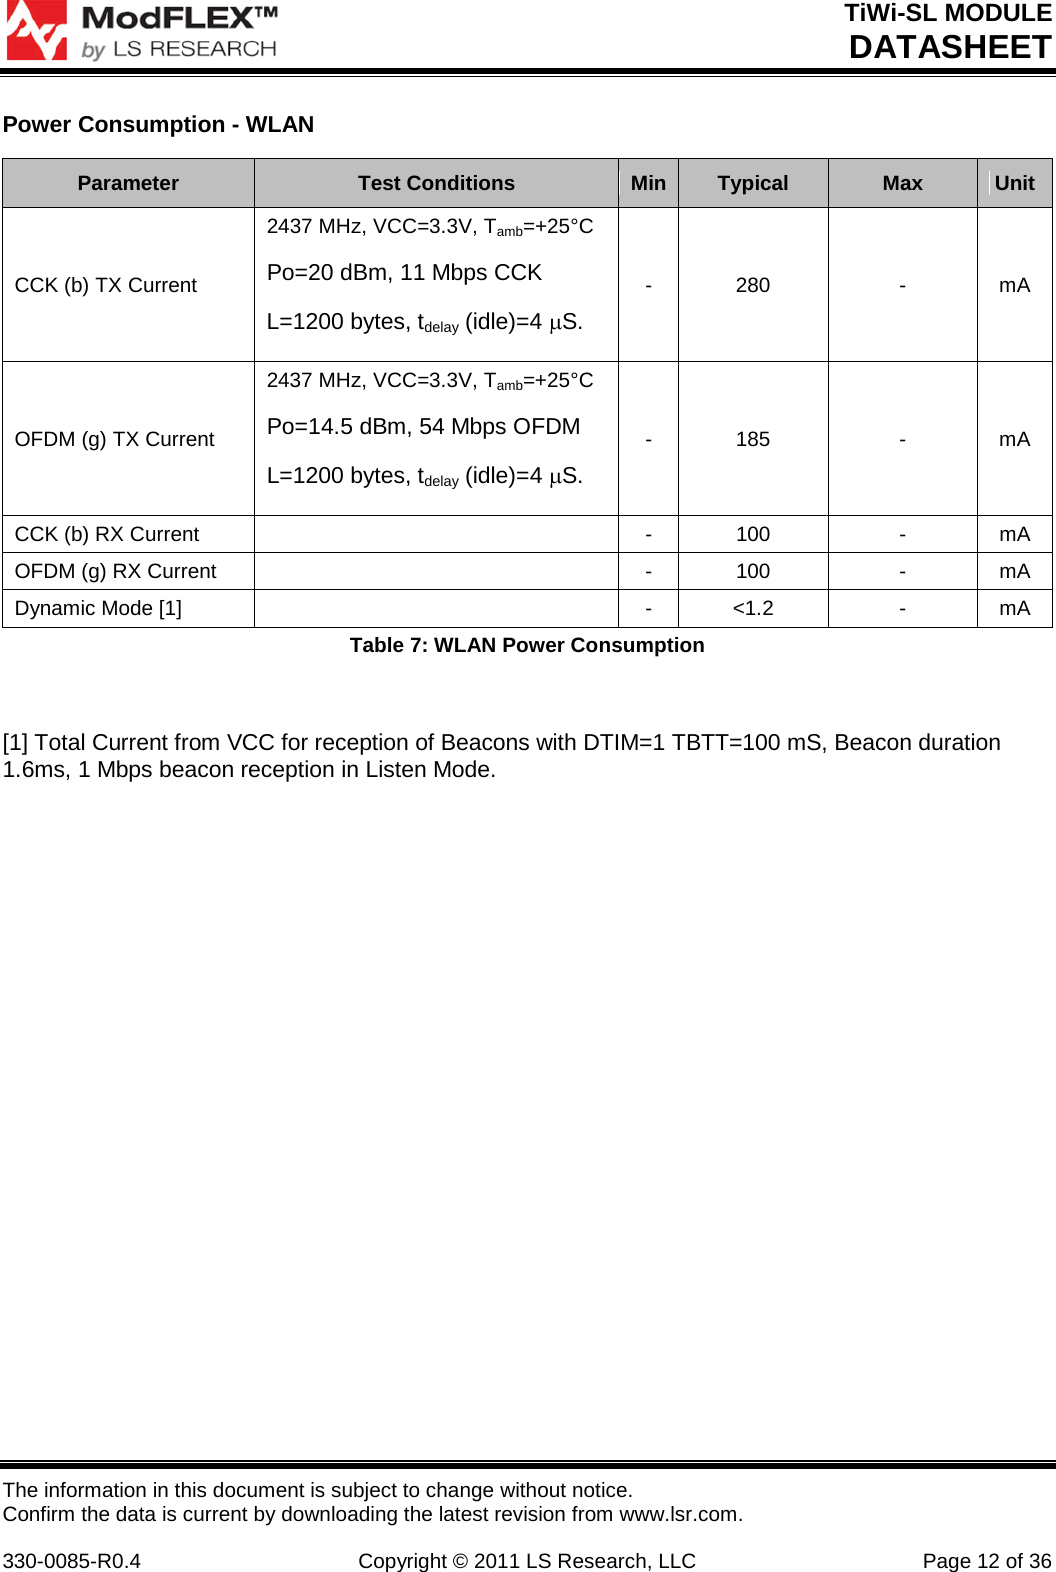 TiWi-SL MODULE DATASHEET The information in this document is subject to change without notice. Confirm the data is current by downloading the latest revision from www.lsr.com.  330-0085-R0.4 Copyright © 2011 LS Research, LLC Page 12 of 36 Power Consumption - WLAN Parameter Test Conditions Min Typical Max Unit CCK (b) TX Current  2437 MHz, VCC=3.3V, Tamb=+25°C Po=20 dBm, 11 Mbps CCK  L=1200 bytes, tdelay (idle)=4 µS.  -  280  -  mA OFDM (g) TX Current 2437 MHz, VCC=3.3V, Tamb=+25°C Po=14.5 dBm, 54 Mbps OFDM  L=1200 bytes, tdelay (idle)=4 µS.  -  185  -  mA CCK (b) RX Current   - 100 - mA OFDM (g) RX Current  - 100 - mA Dynamic Mode [1]   - &lt;1.2 - mA Table 7: WLAN Power Consumption  [1] Total Current from VCC for reception of Beacons with DTIM=1 TBTT=100 mS, Beacon duration 1.6ms, 1 Mbps beacon reception in Listen Mode.    